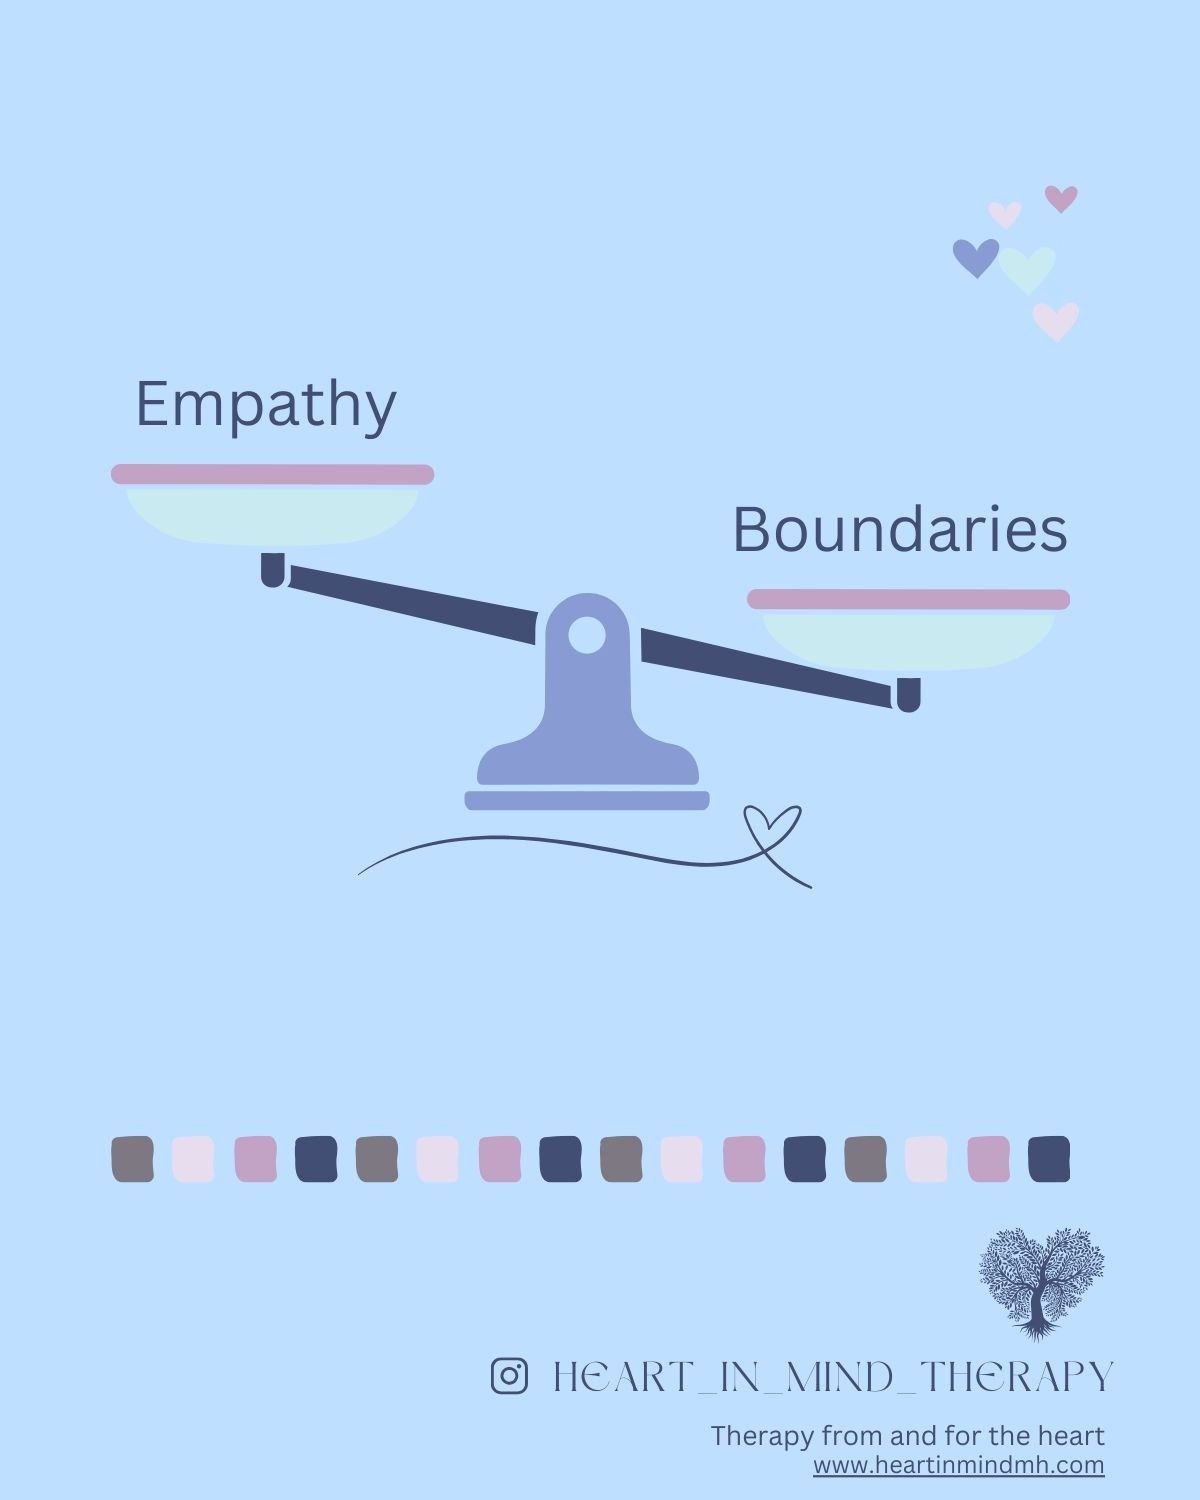 In much of my work as a therapist, something that often comes up is how to balance empathy with boundaries. 

Sometimes...a lot of times, especially if we've grown up learning that our needs come after taking care of everyone else, we can become cond